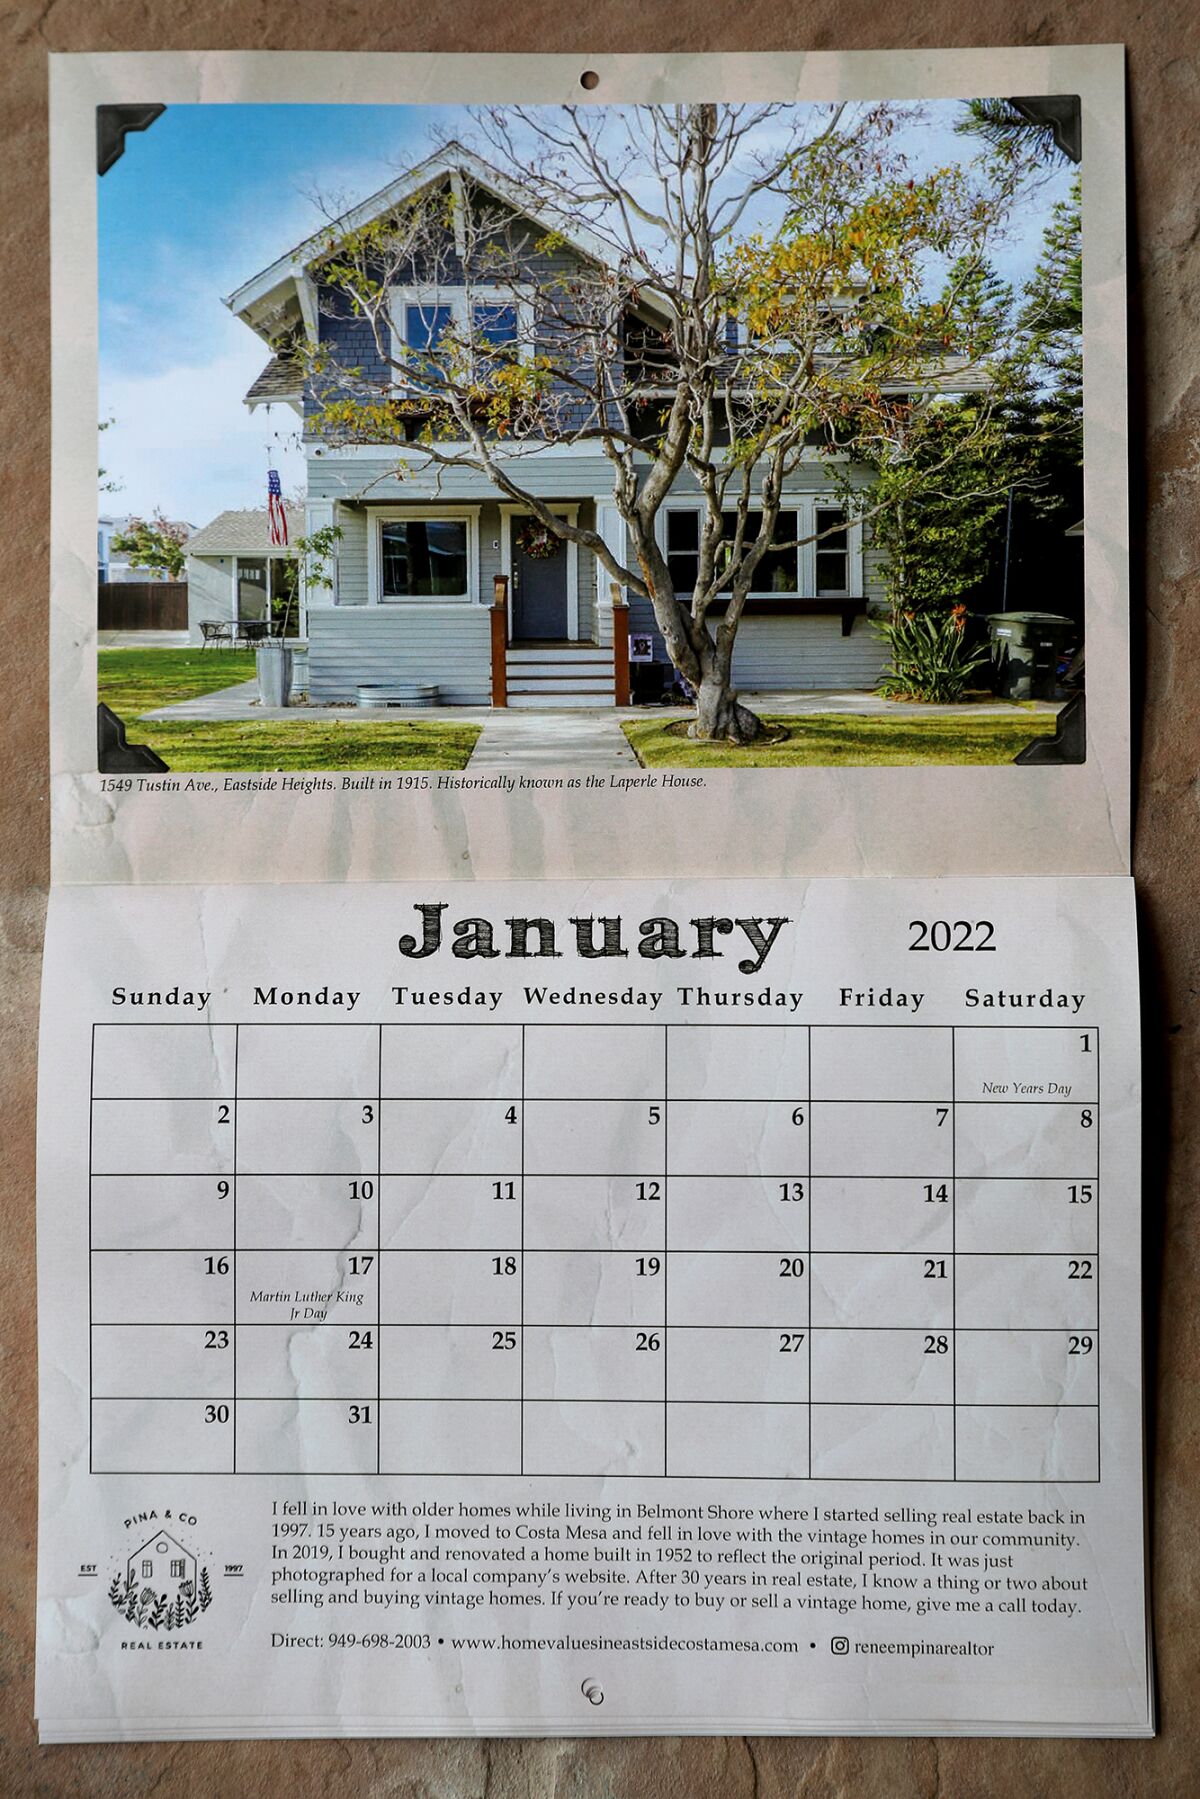 The month of January shows a photo of an Eastside Heights home, built in 1915, along Tustin Avenue in Costa Mesa.